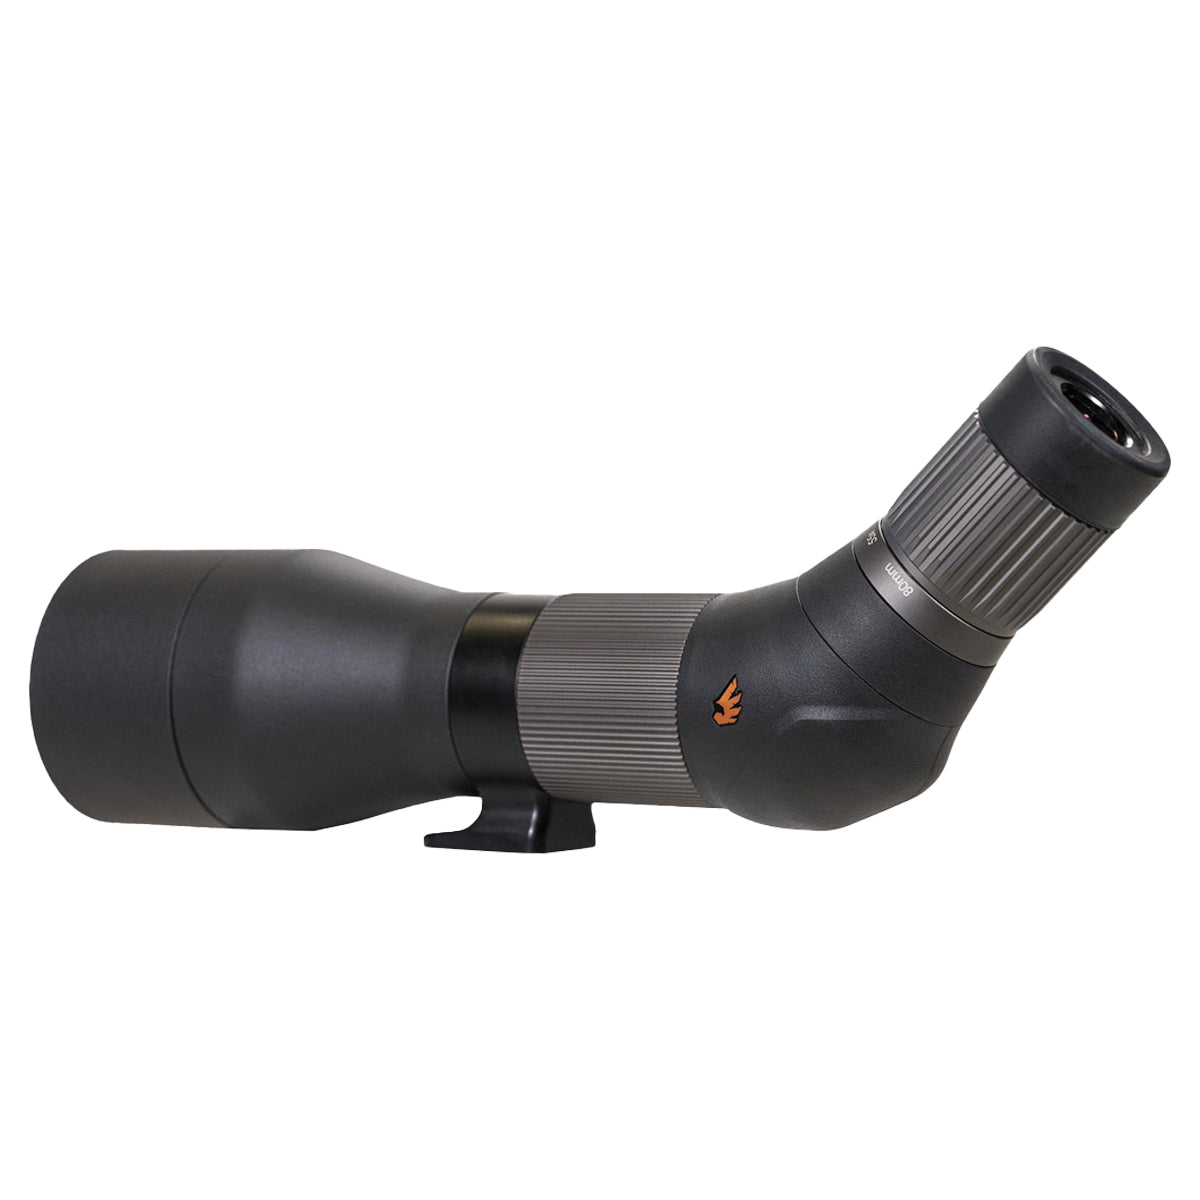 Revic Acura S80a Angled Spotting Scope in  by GOHUNT | Revic - GOHUNT Shop